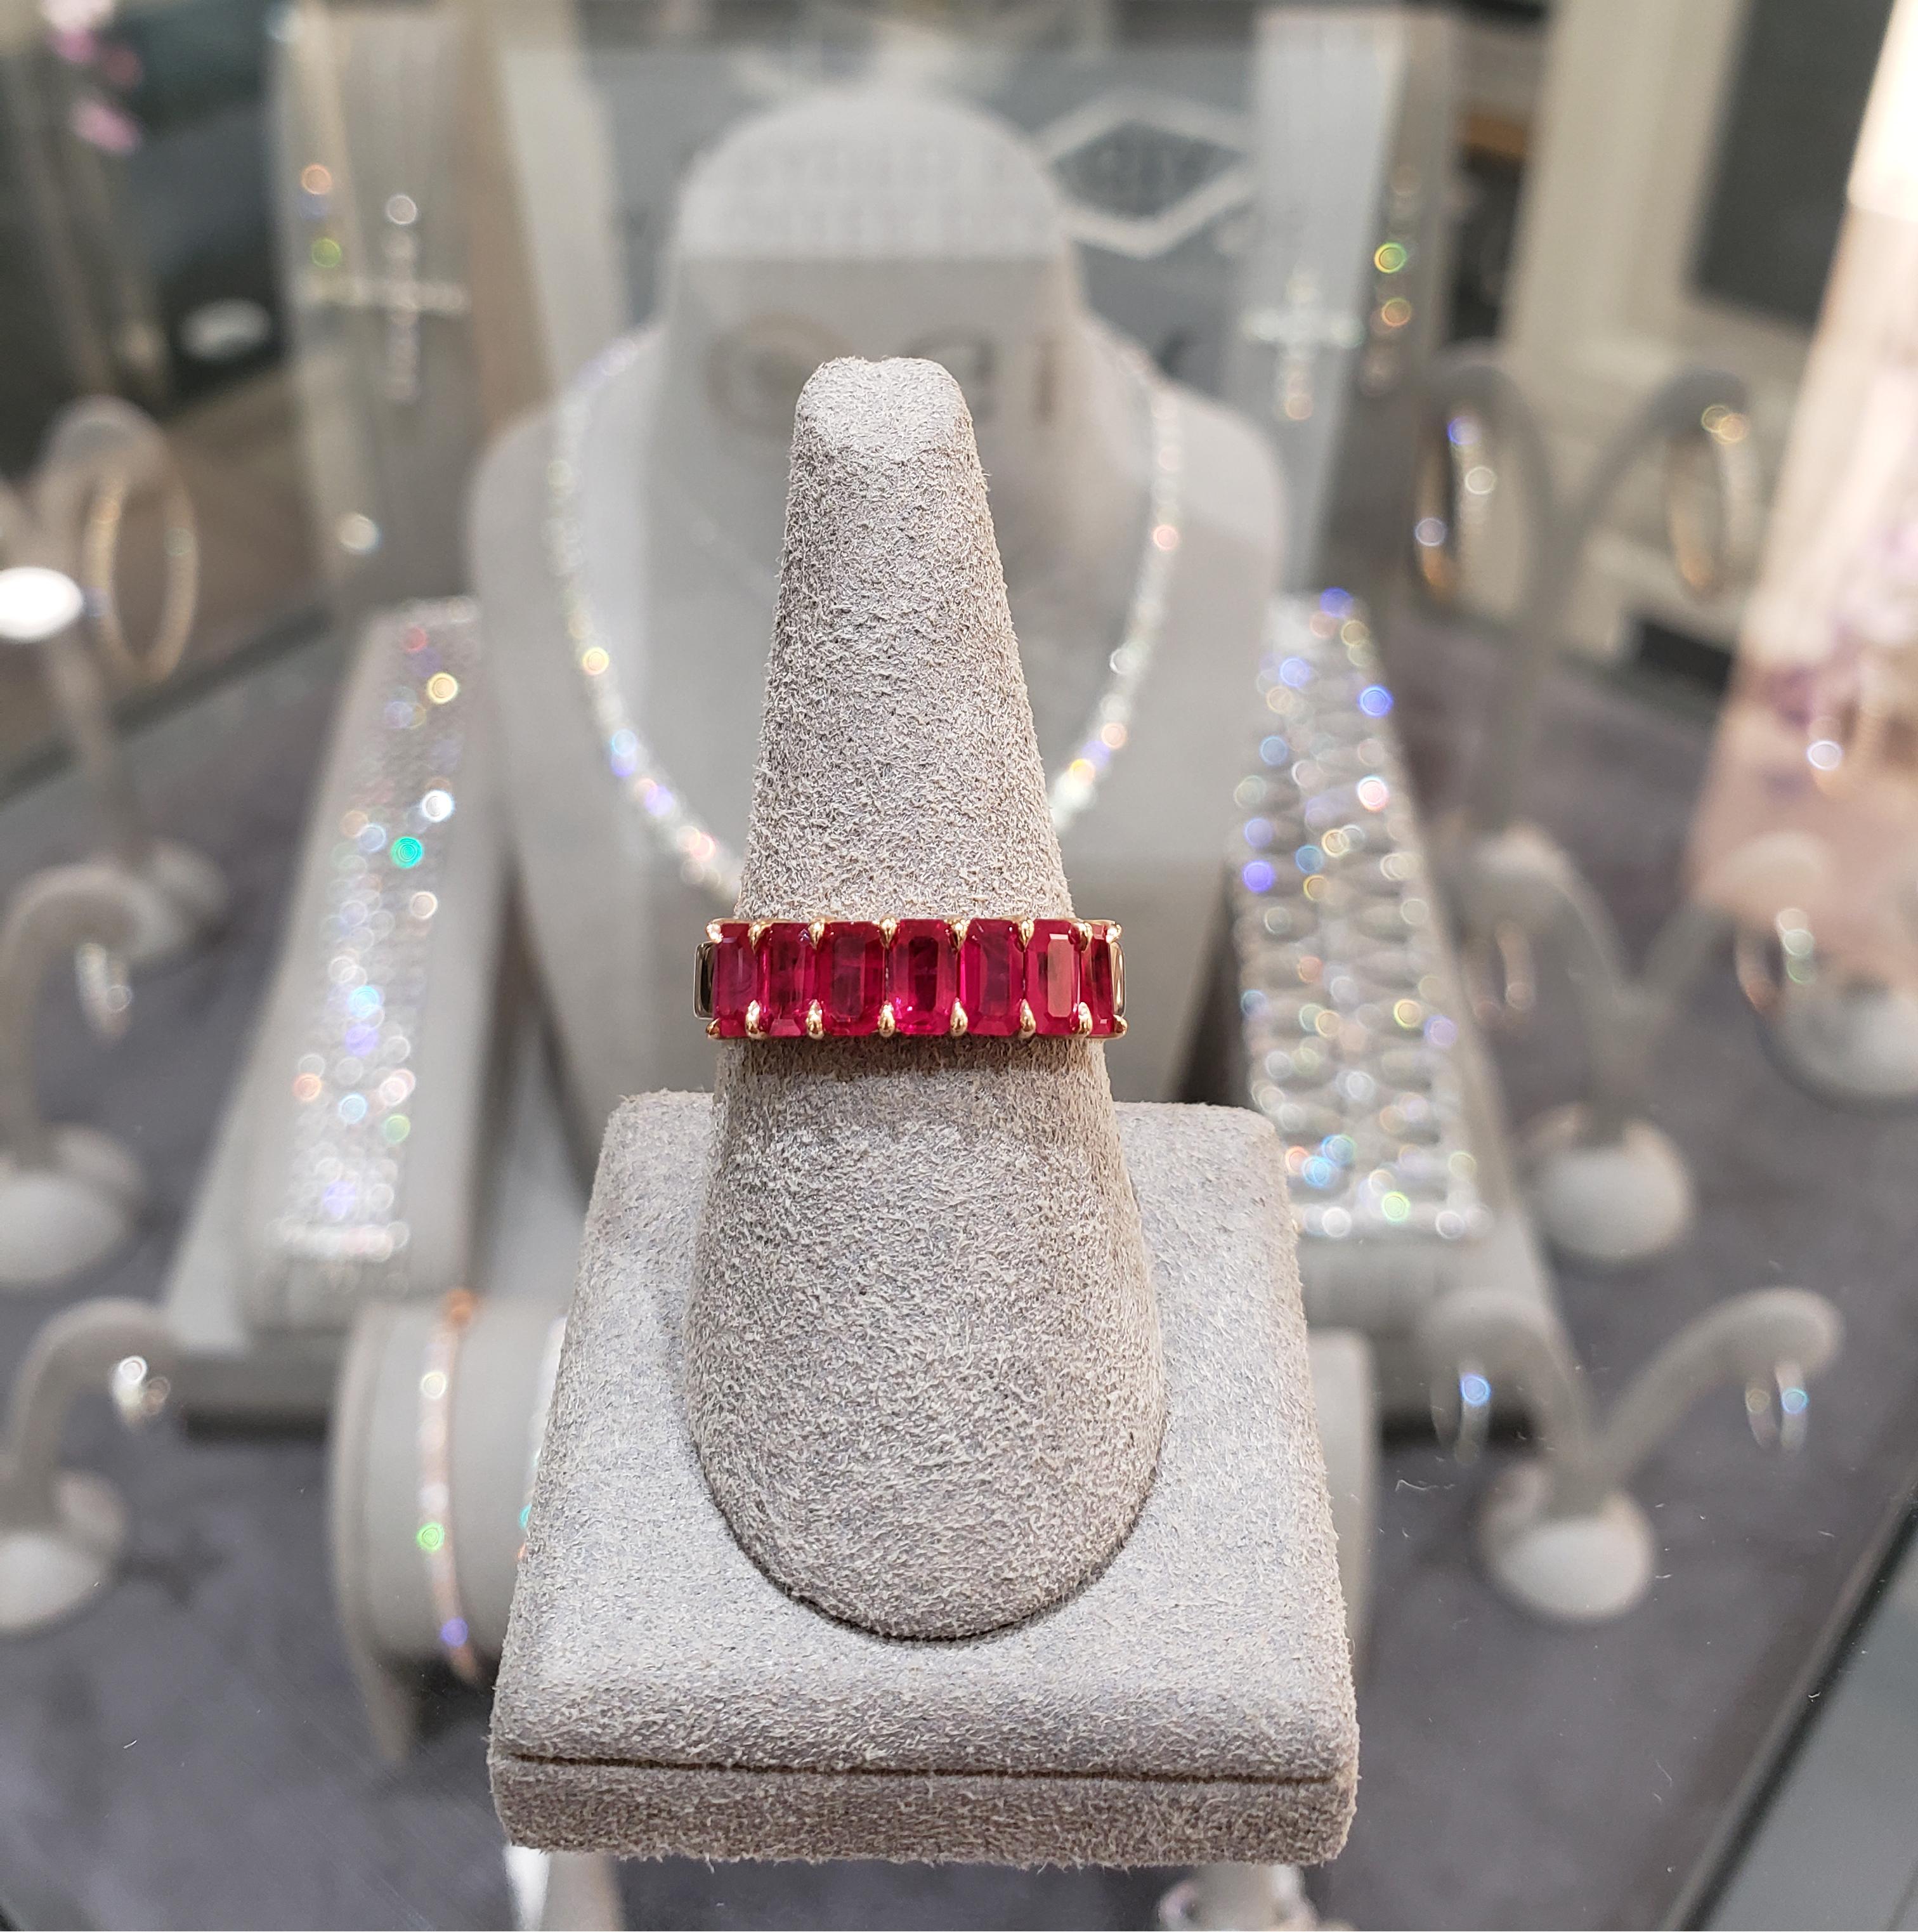 Features a seven-stone wedding band ring with vibrant emerald cut rubies weighing 1.72 carat total. Set in a shared prong, Made with 18K Rose Gold, size 6 US and resizable upon request. 

Roman Malakov is a custom house, specializing in creating